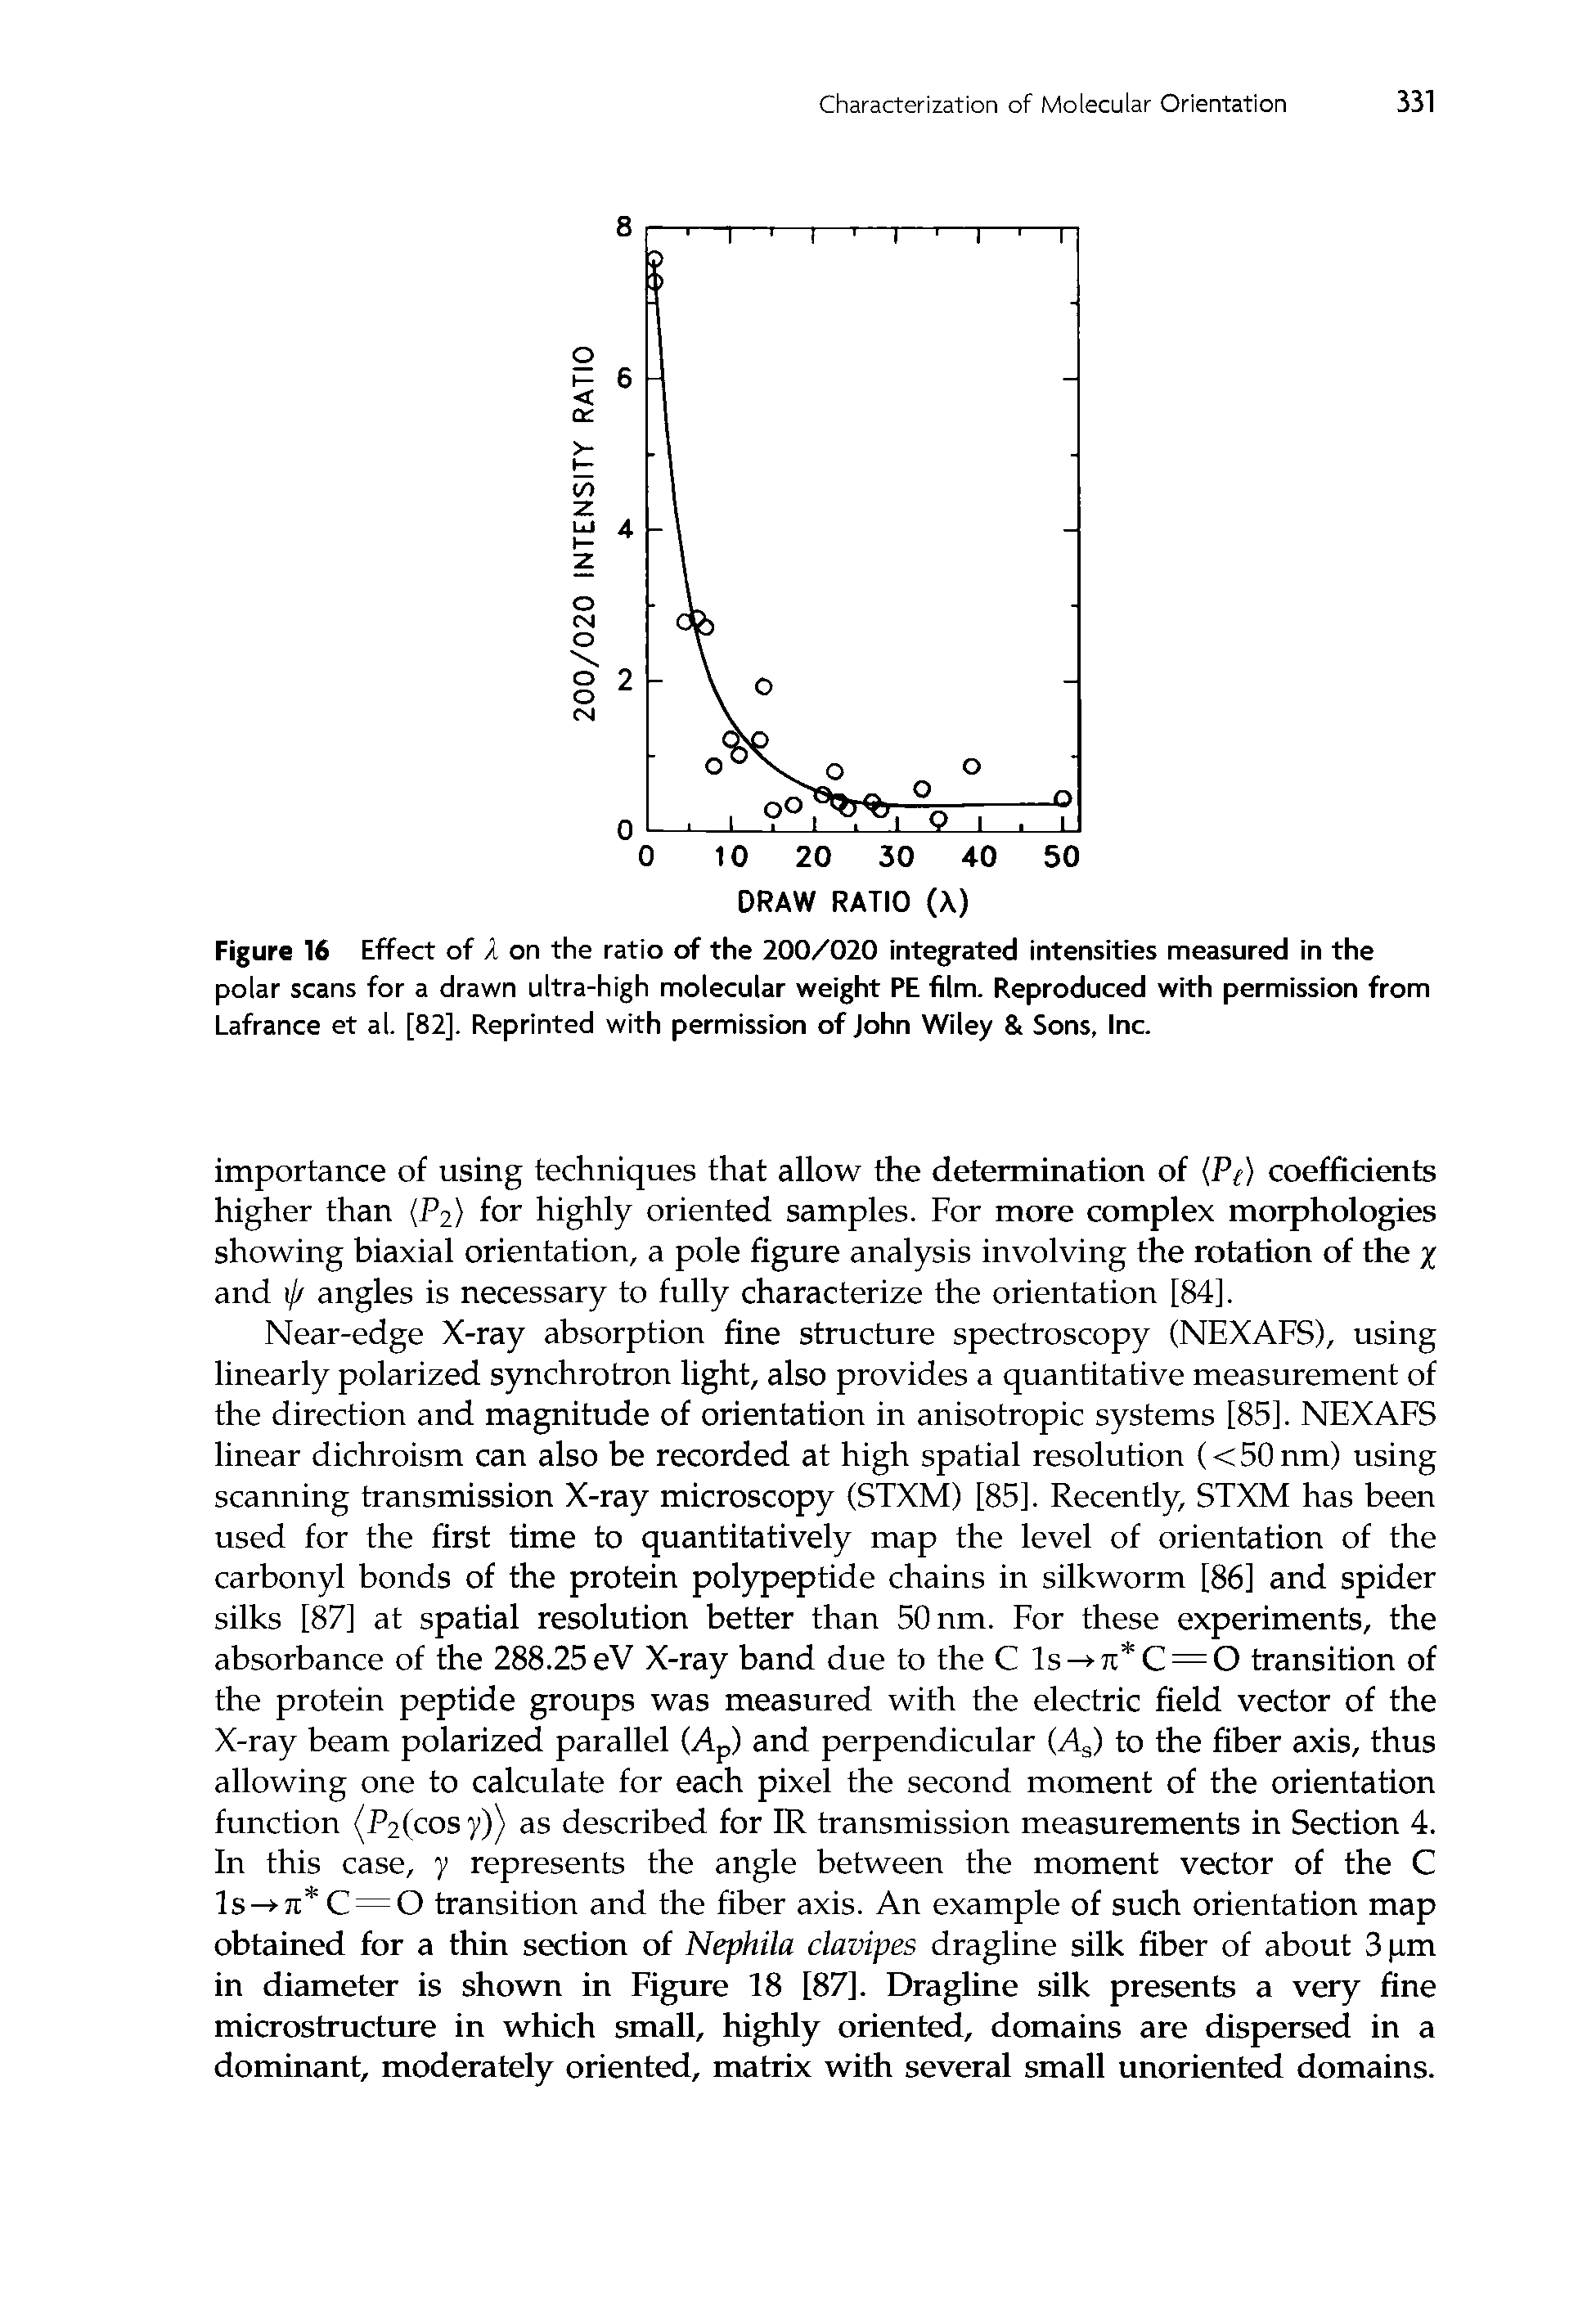 Figure 16 Effect of X on the ratio of the 200/020 integrated intensities measured in the polar scans for a drawn ultra-high molecular weight PE film. Reproduced with permission from Lafrance et al. [82]. Reprinted with permission of John Wiley 8t Sons, Inc.